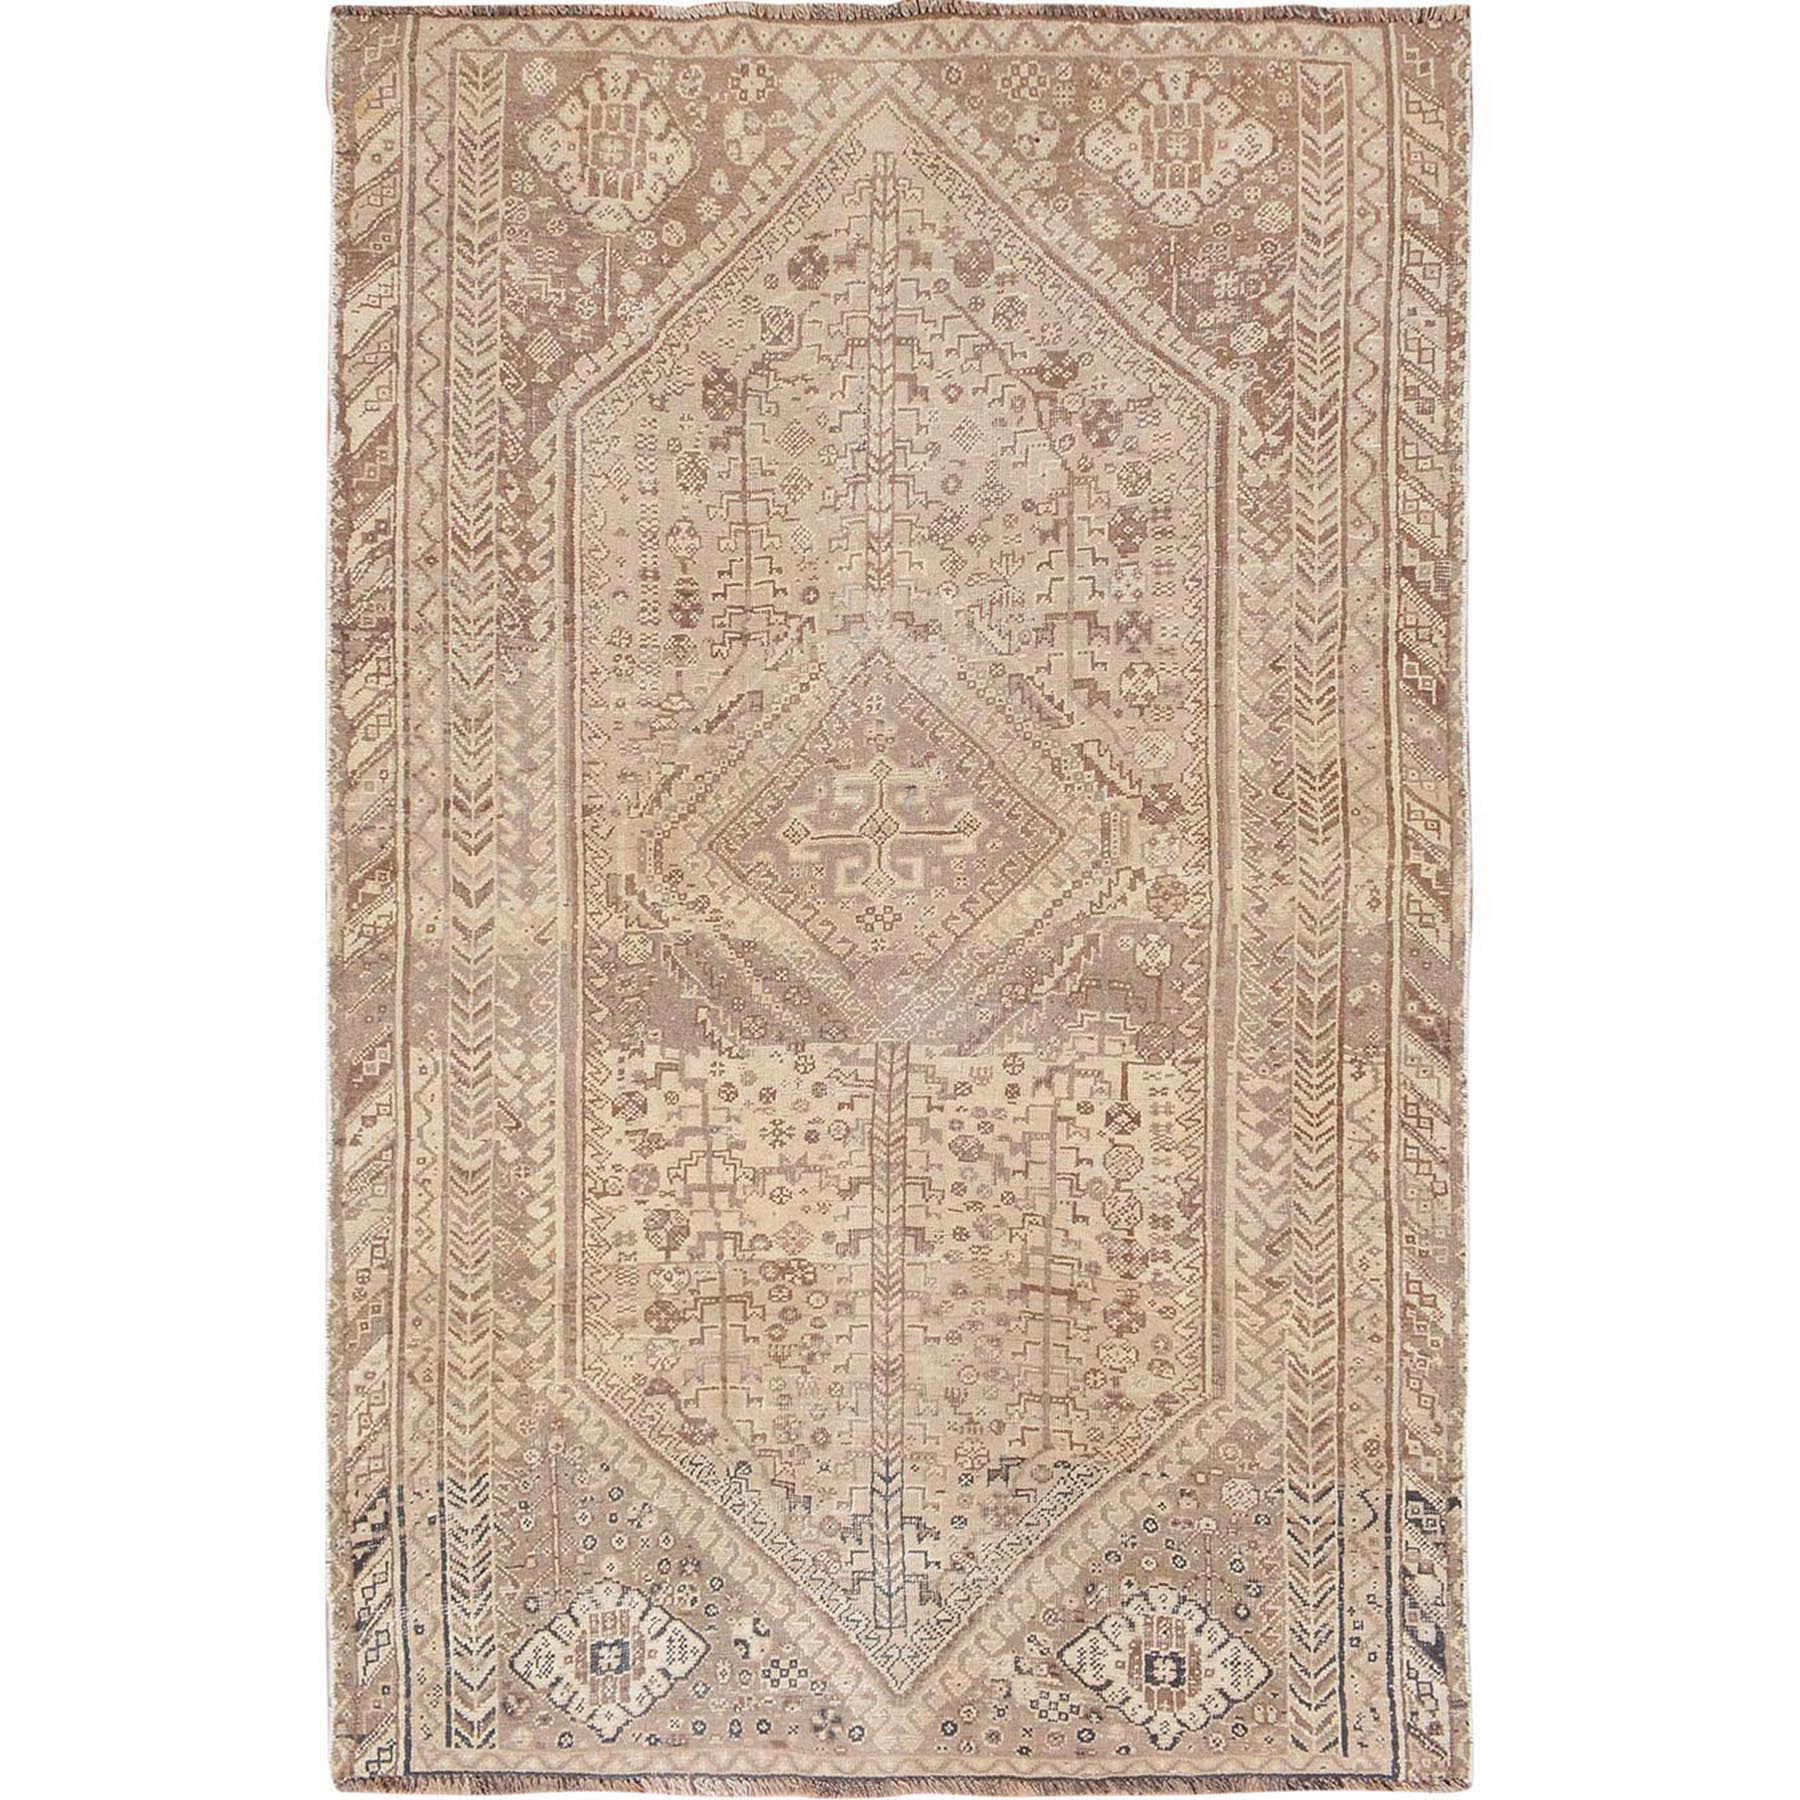 4'9"X7'2" Natural Colors Old And Worn Down Persian Shiraz Hand Knotted Oriental Rug moae7609